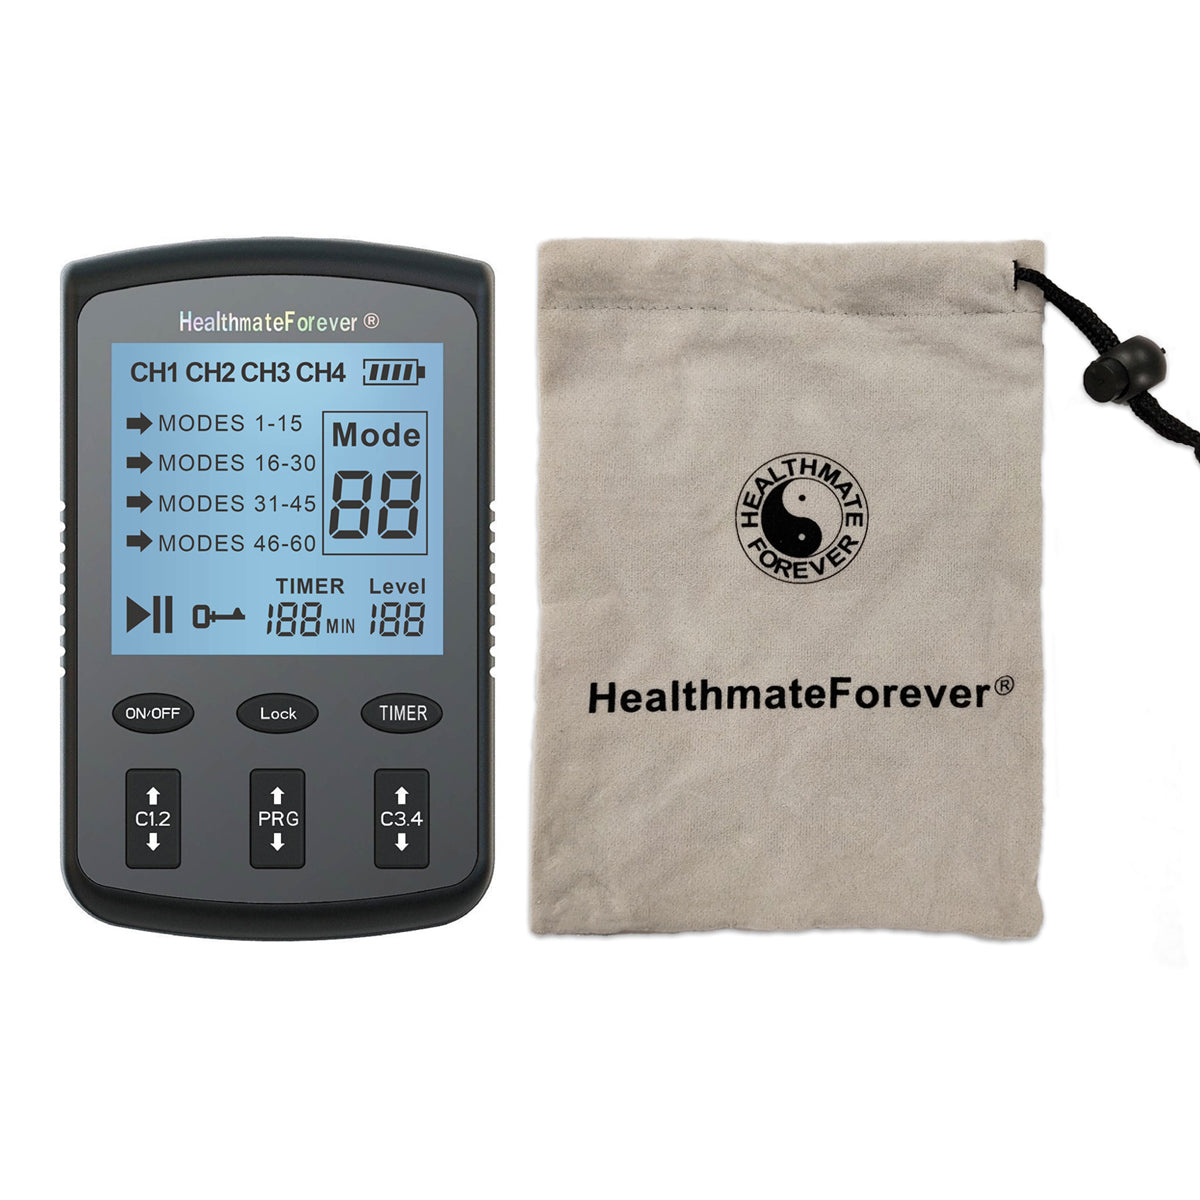 New Arrival - 2020 Version ZT60AB Powerful Electrotherapy Pain Relief TENS UNIT - 2 Year Warranty - HealthmateForever.com